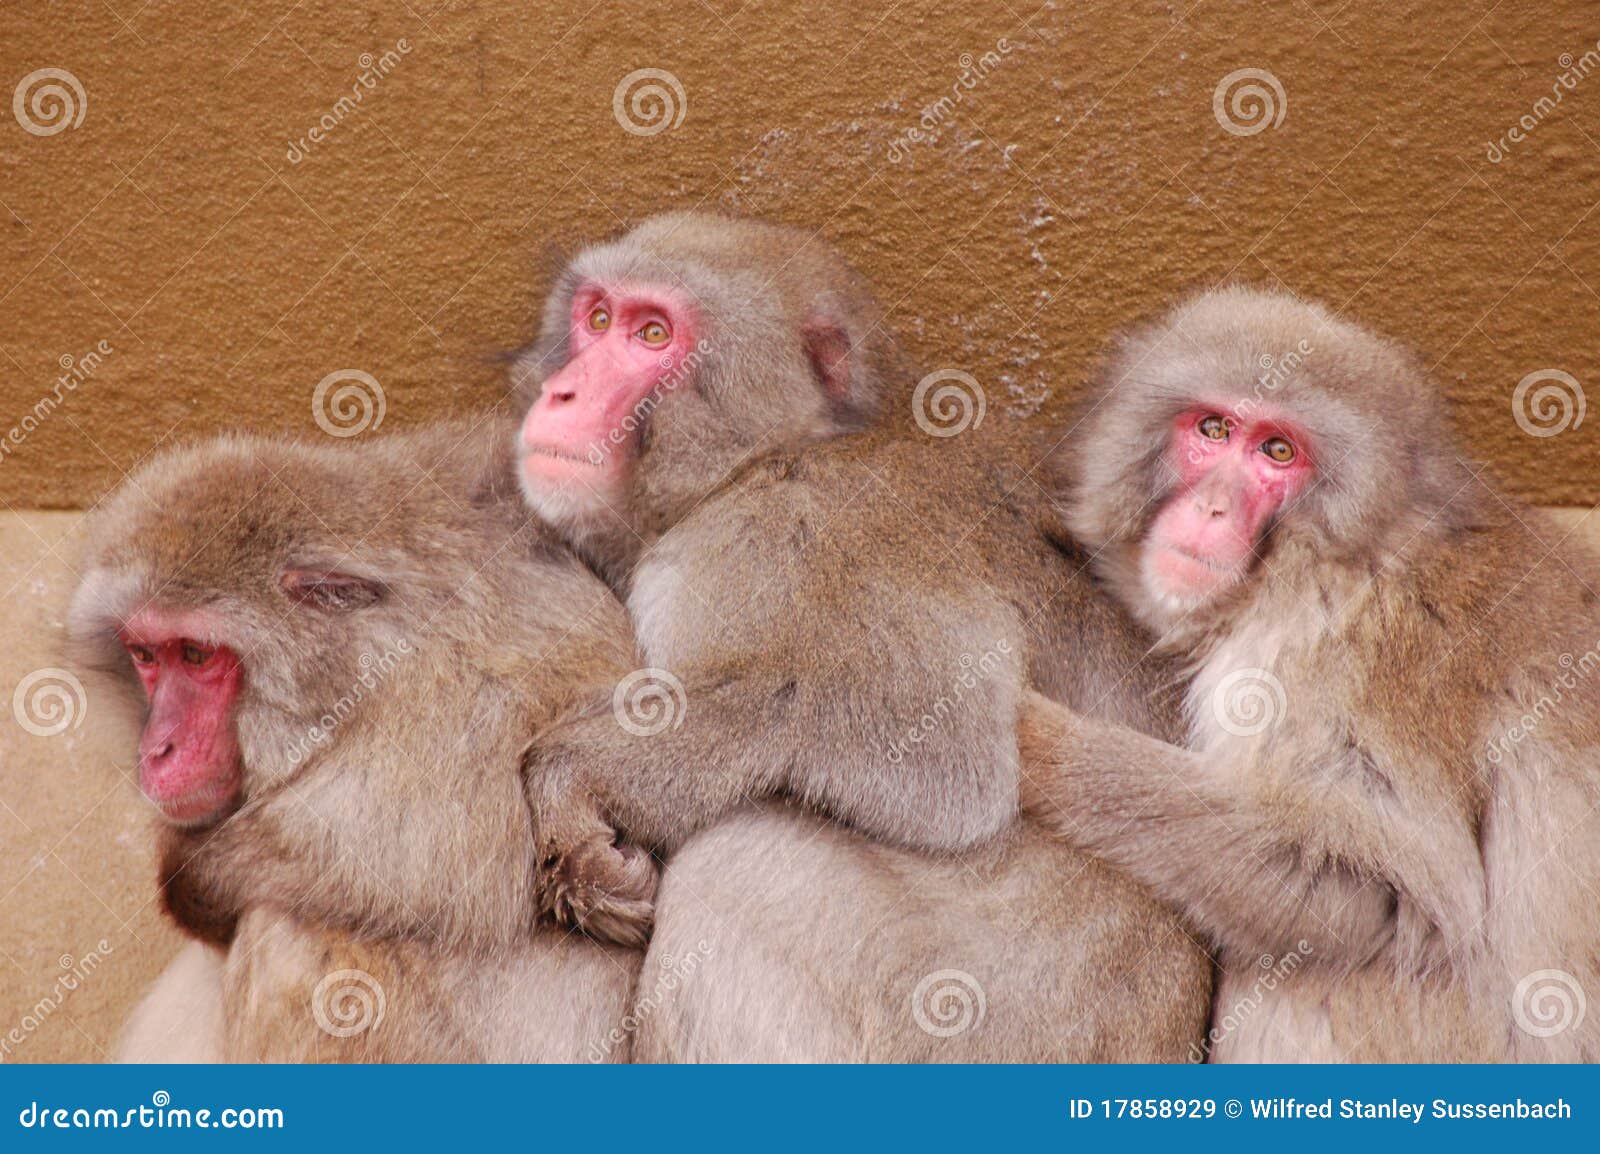 apes holding eachother